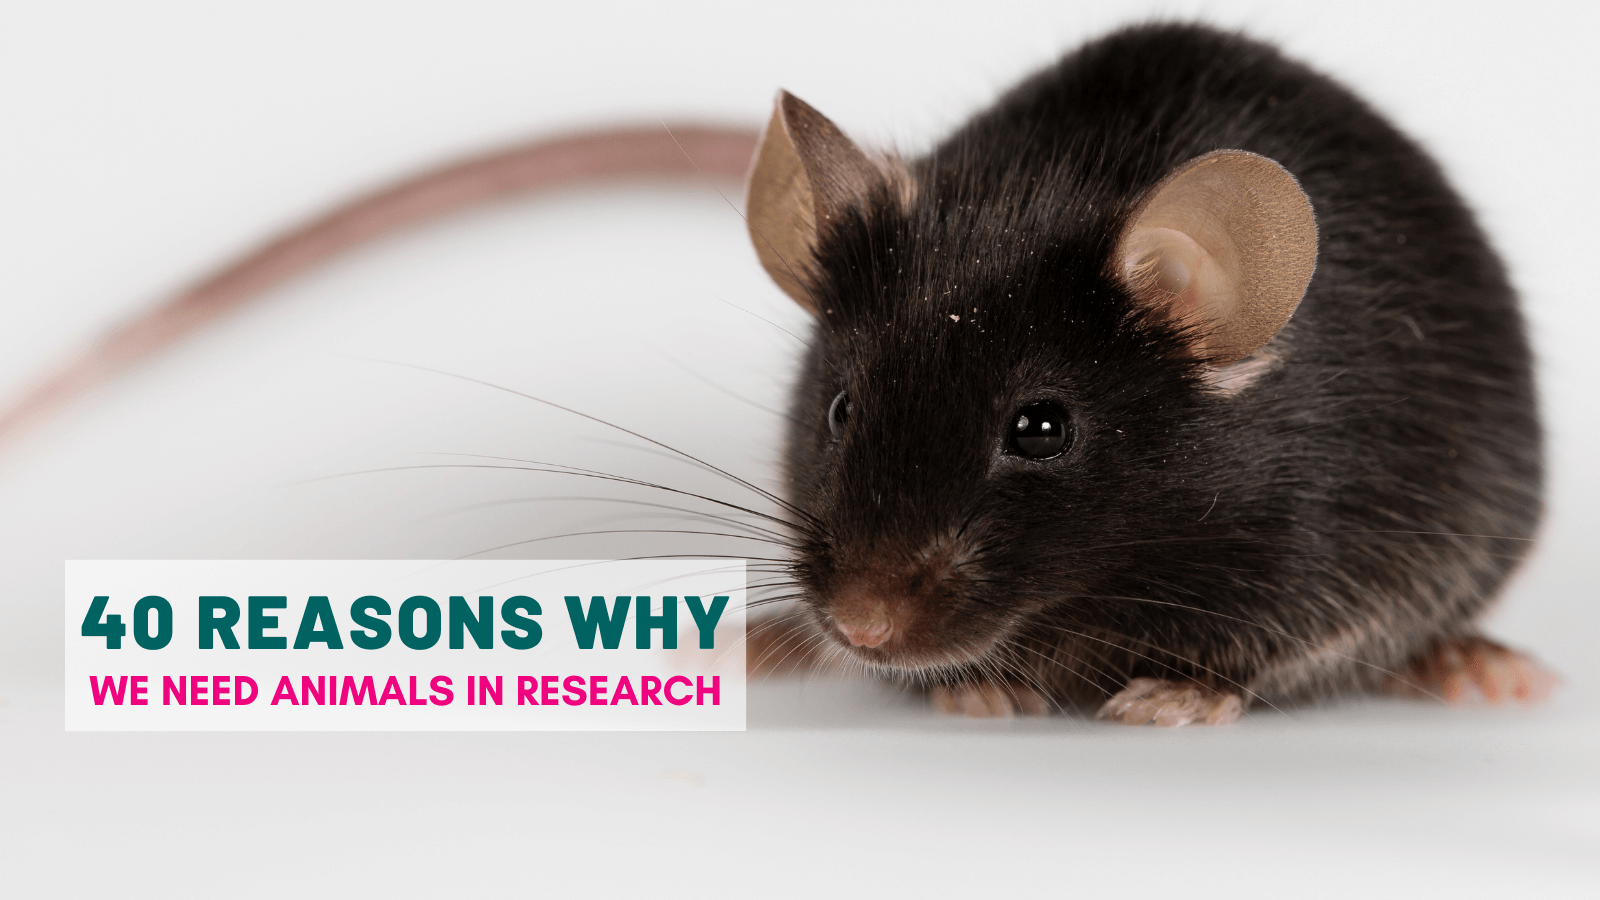 Forty reasons why we need animals in research